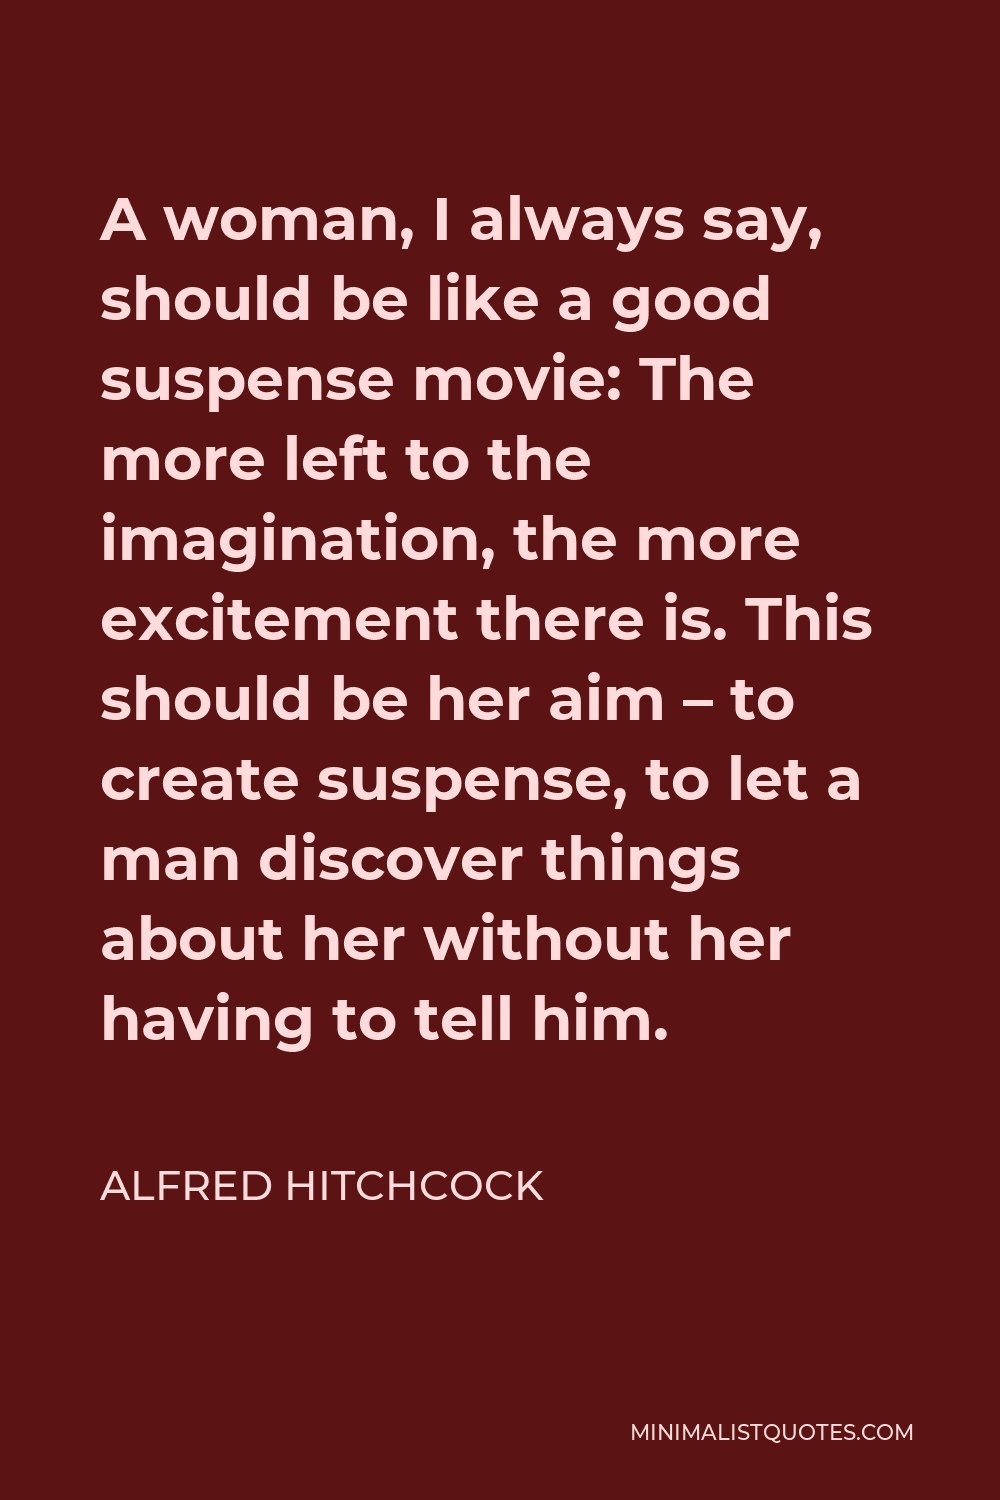 Alfred Hitchcock Quote - A woman, I always say, should be like a good suspense movie: The more left to the imagination, the more excitement there is. This should be her aim – to create suspense, to let a man discover things about her without her having to tell him.